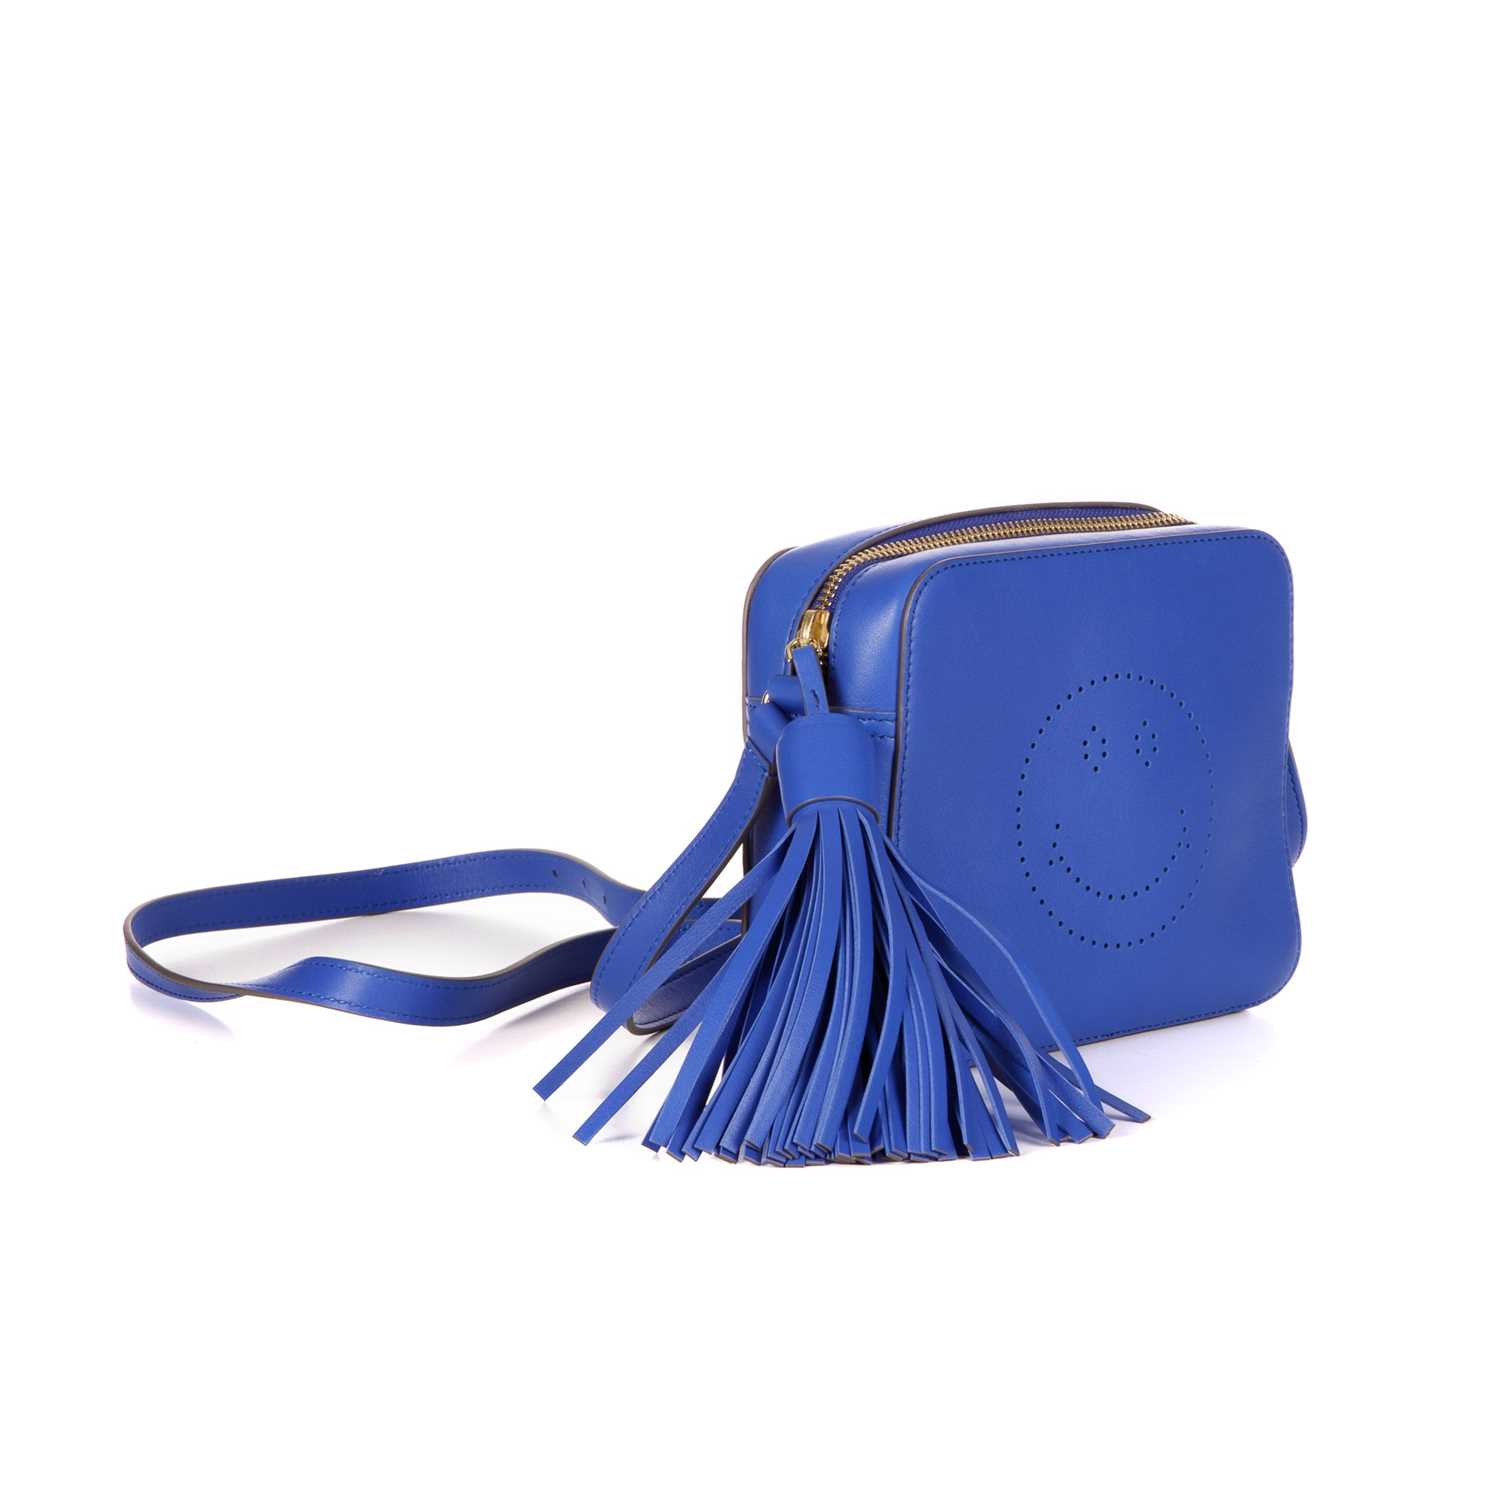 Anya Hindmarch, a blue Smiley crossbody handbag, crafted from smooth electric blue leather, - Image 3 of 4